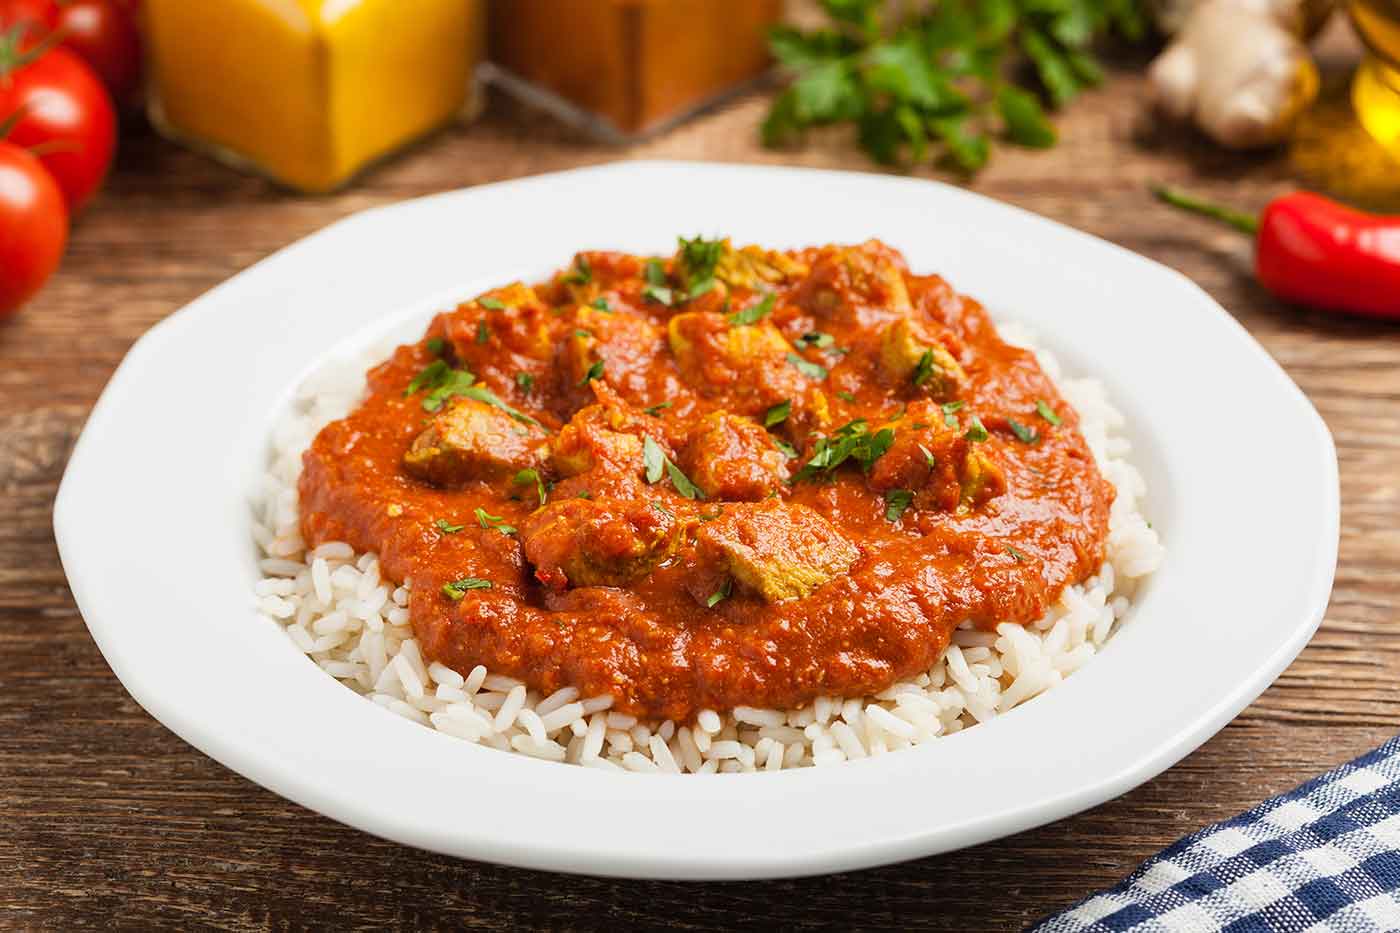 South Philly Tiffin Indian Cuisine Recipe Blogs How to Make your own Chicken Tikka Masala at home. Center City Queen Village Rittenhouse SQ